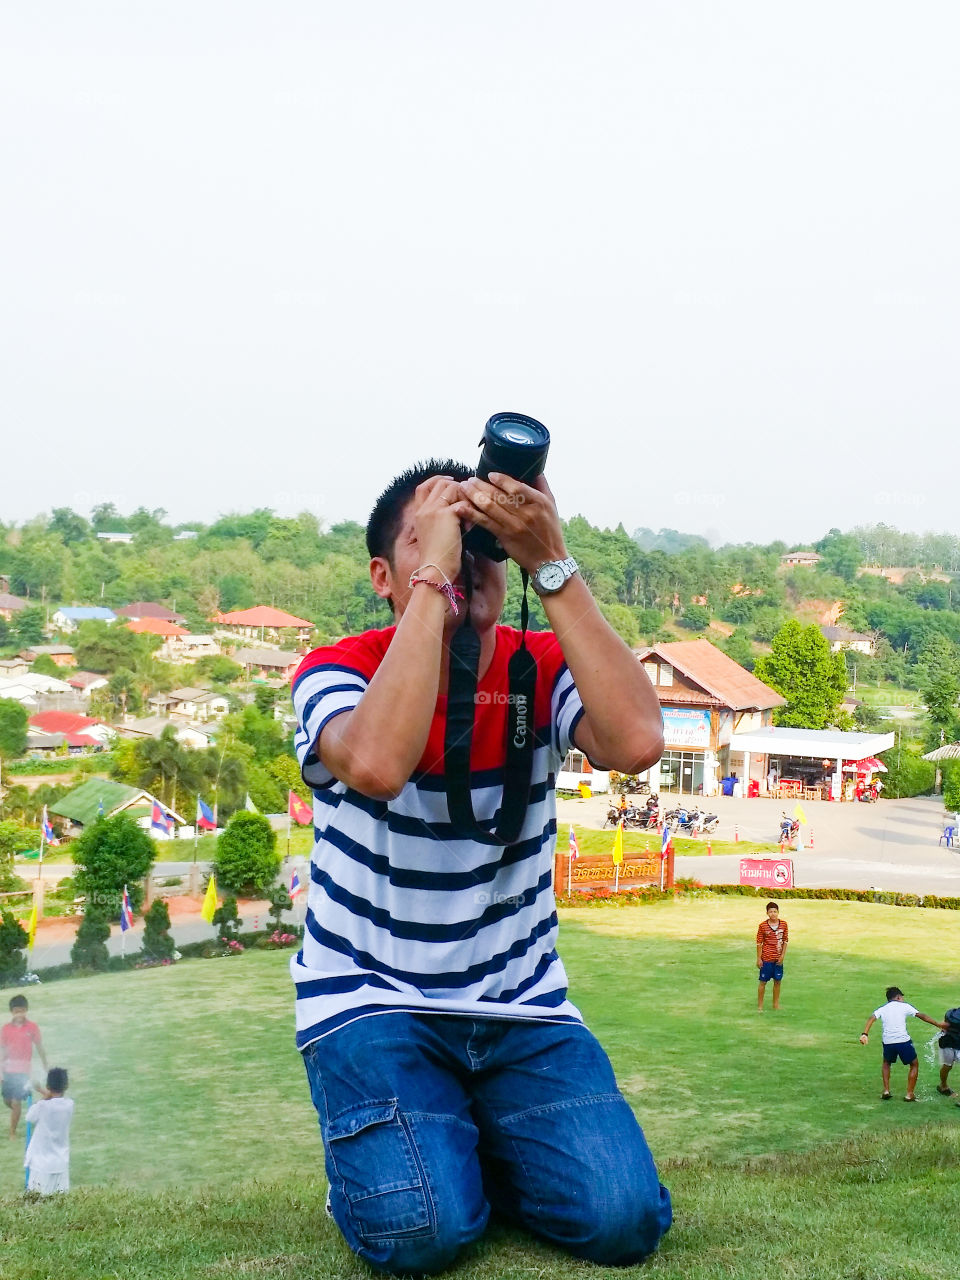 Photographer in action. It's me.